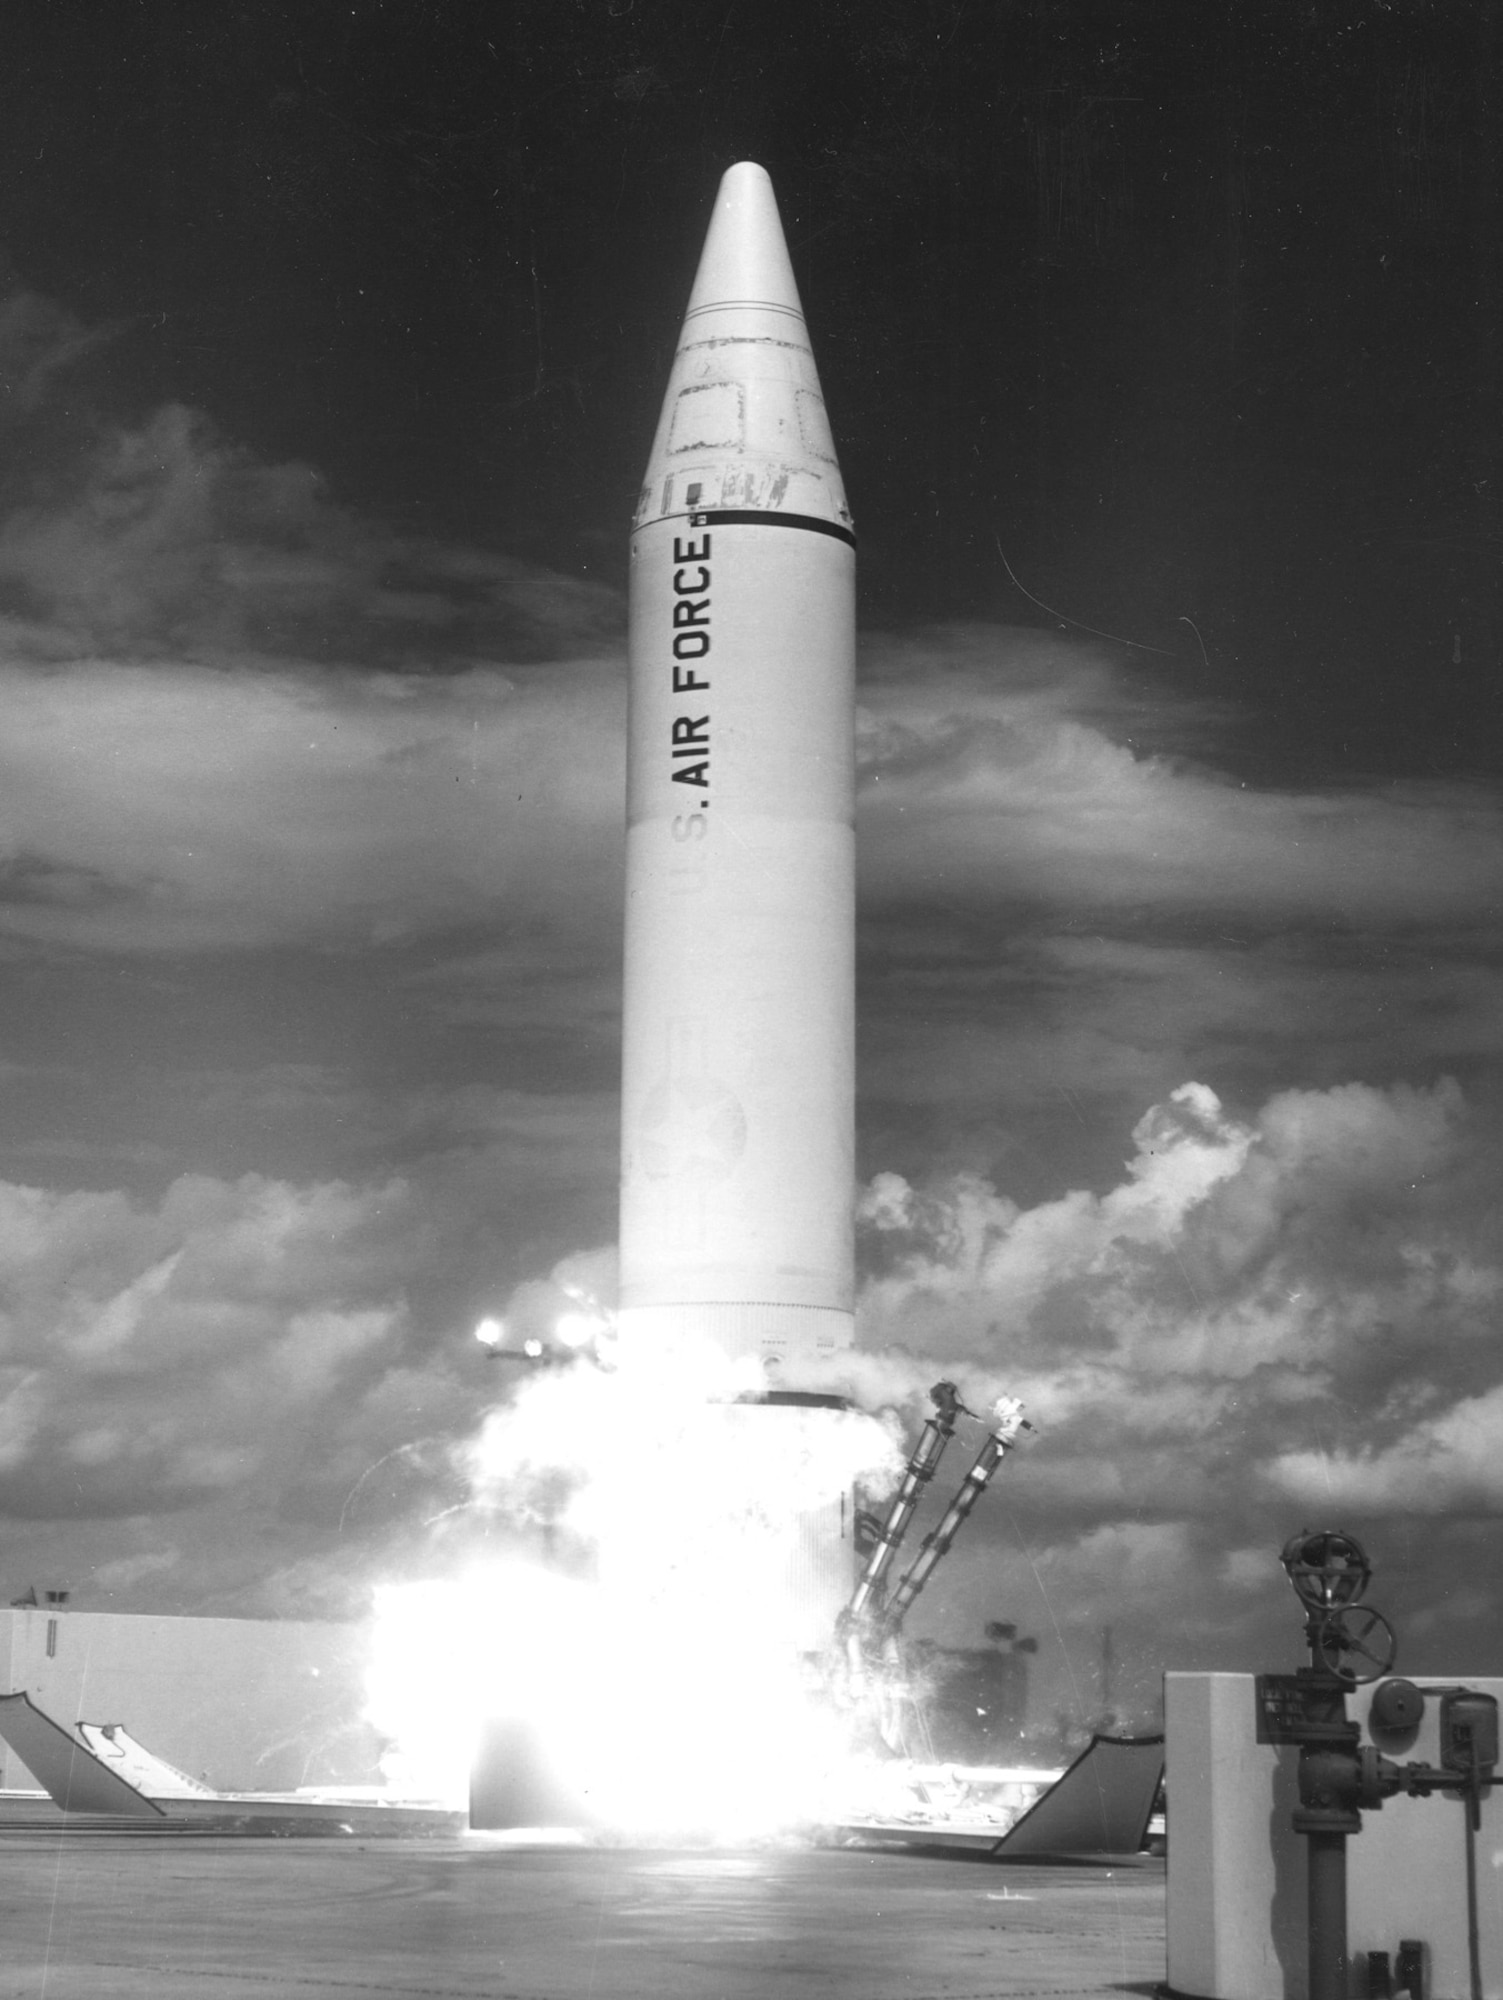 A Rocketdyne LR79 (S-3D) engine ignites during a Jupiter test launch at Cape Canaveral, Florida, in 1960. Note the coating of frost around the missile’s center, caused by cold liquid oxygen. (U.S. Air Force photo).